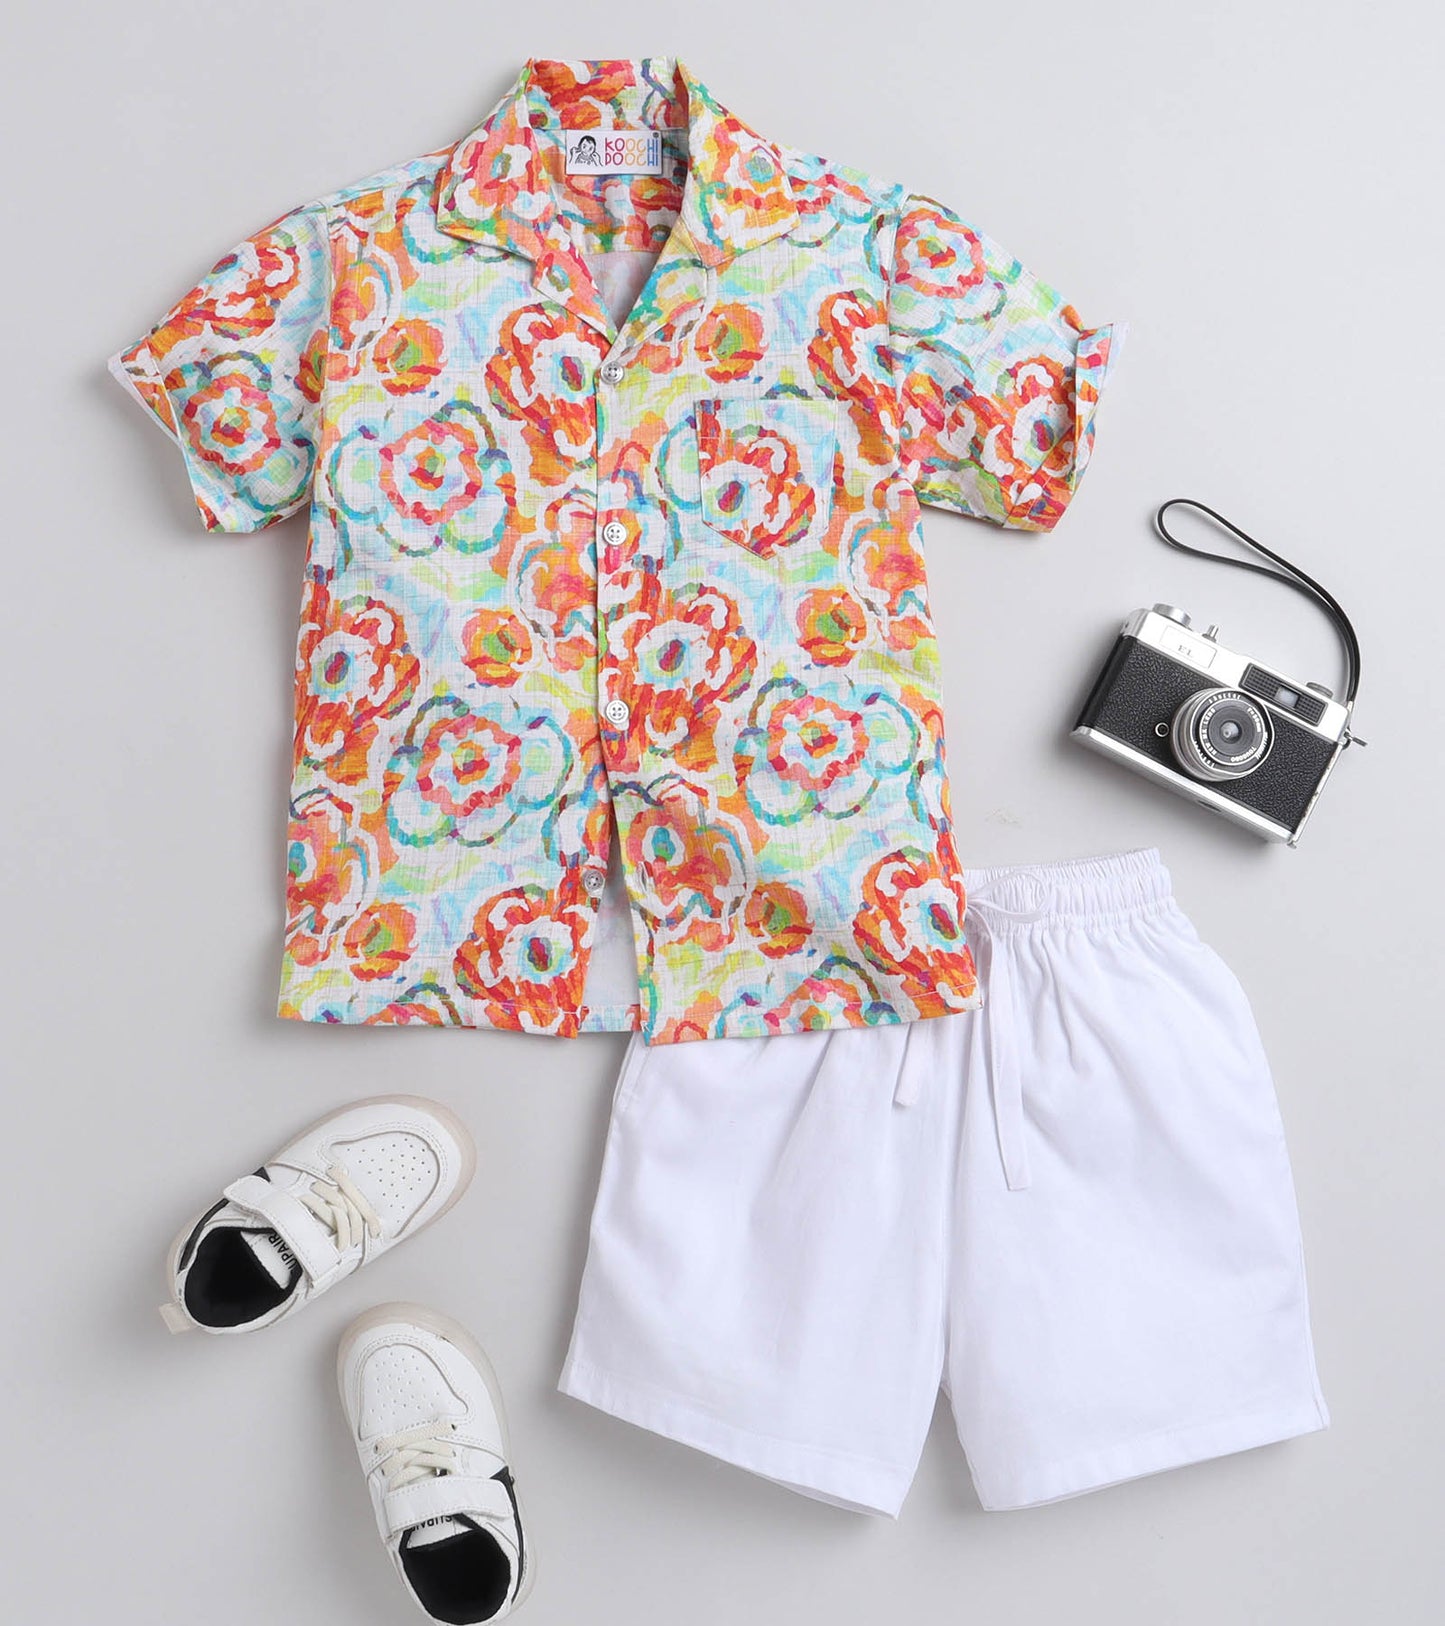 Flower Lush Digital printed Shirt with White solid Shorts